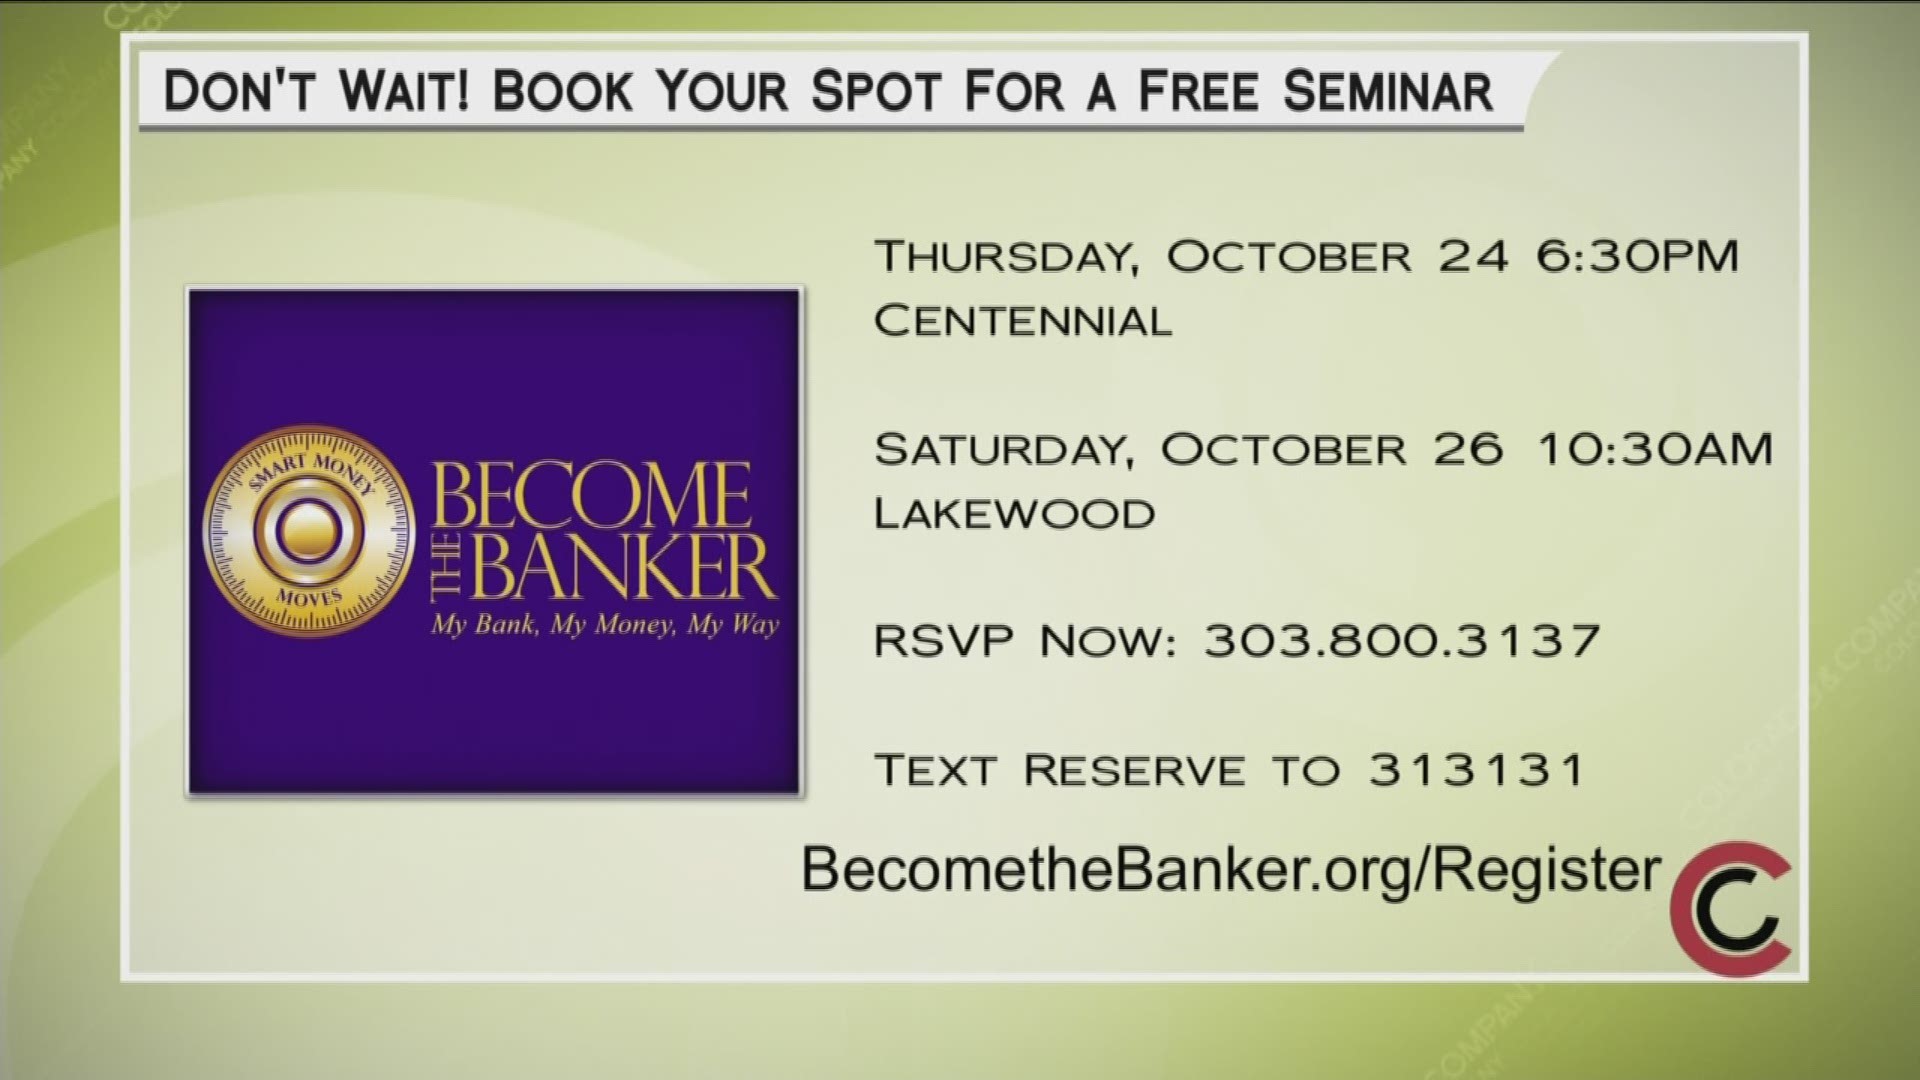 Sign up for an upcoming seminar at www.BecomeTheBanker.org/Register, or text RESERVE to 313131, or call 303.800.3137